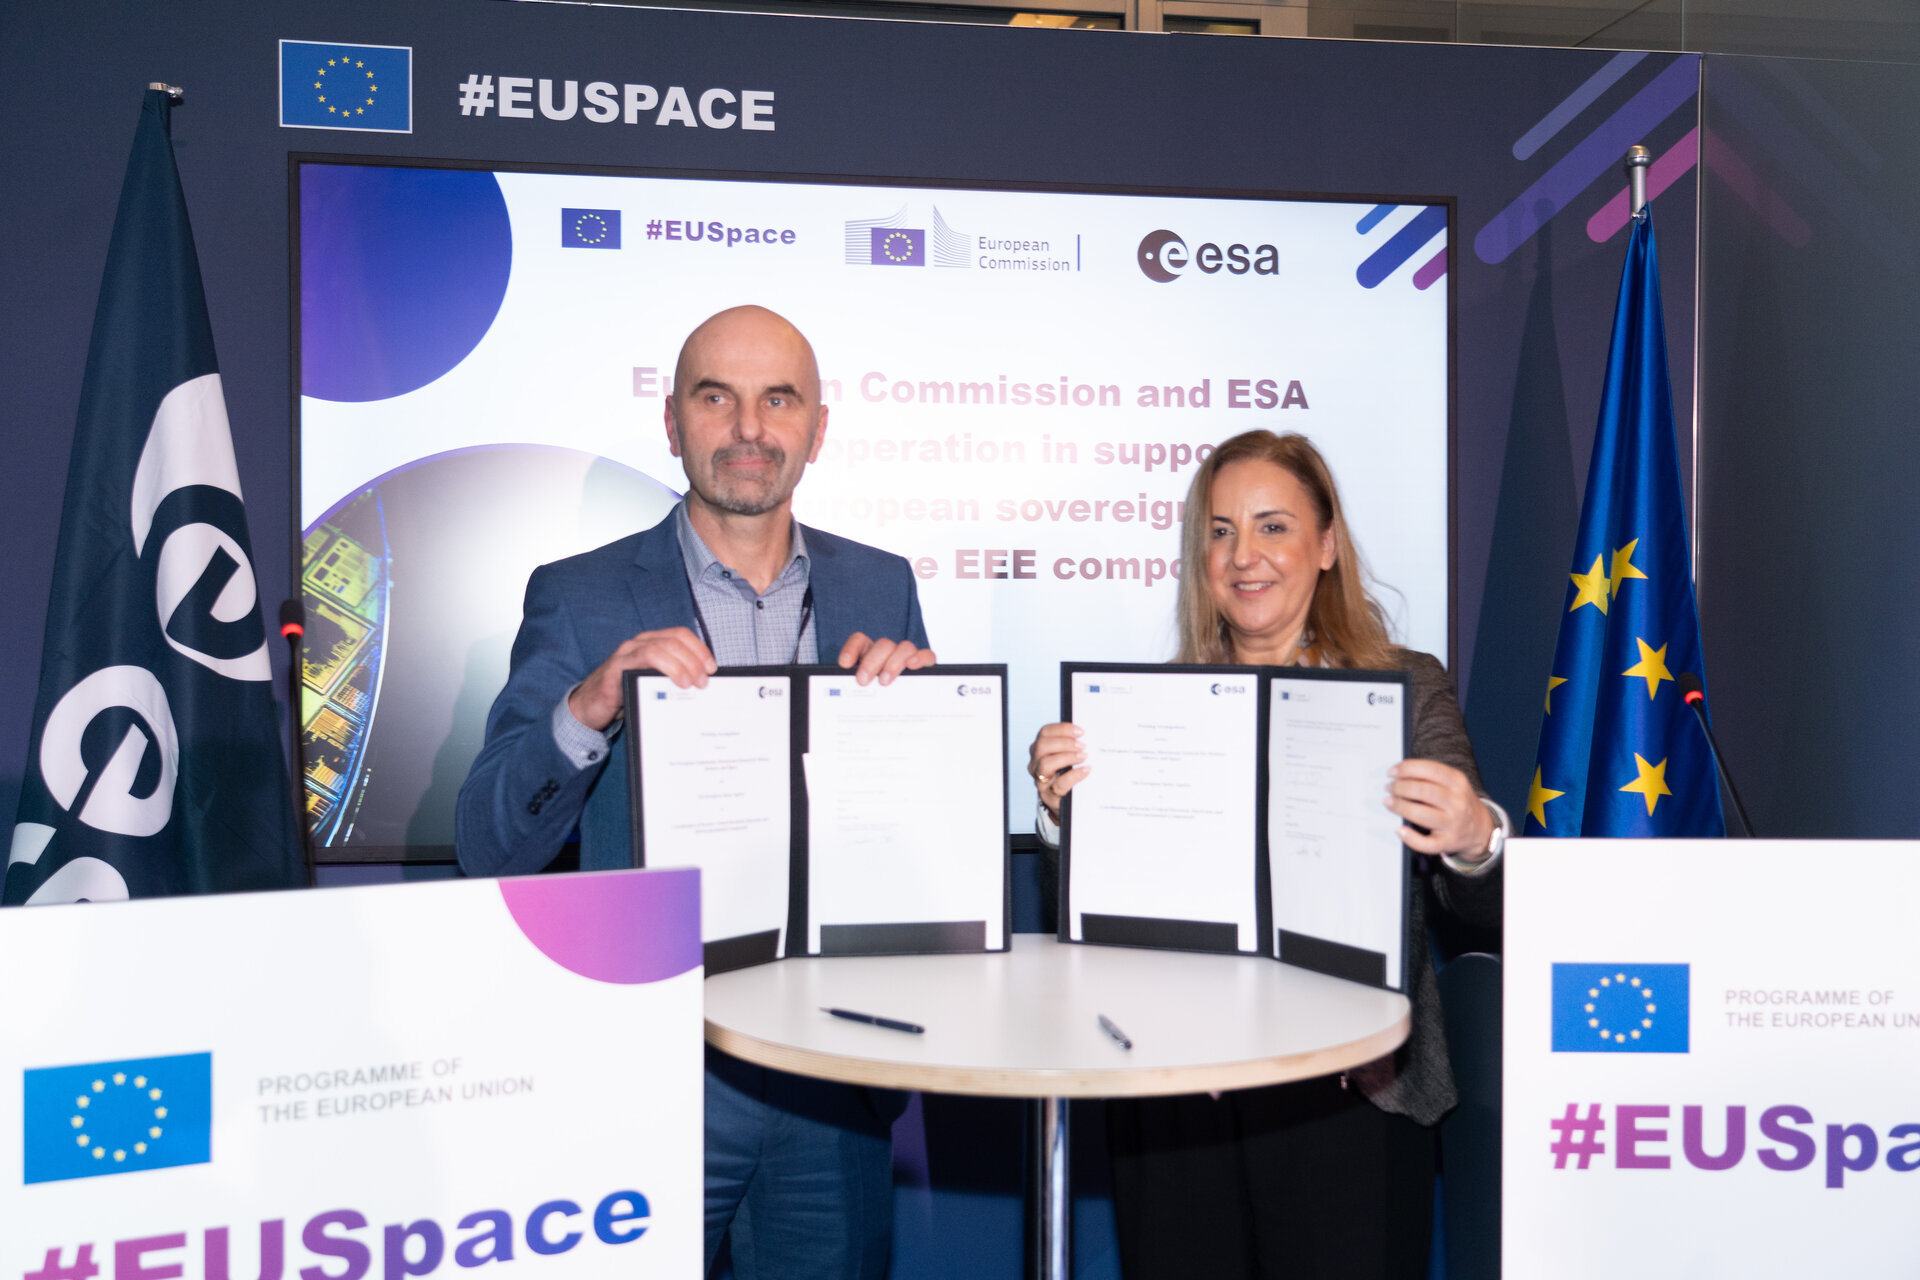 Dietmar Pilz and Catherine KAVVAD sign a new cooperation agreement for secure EEE components